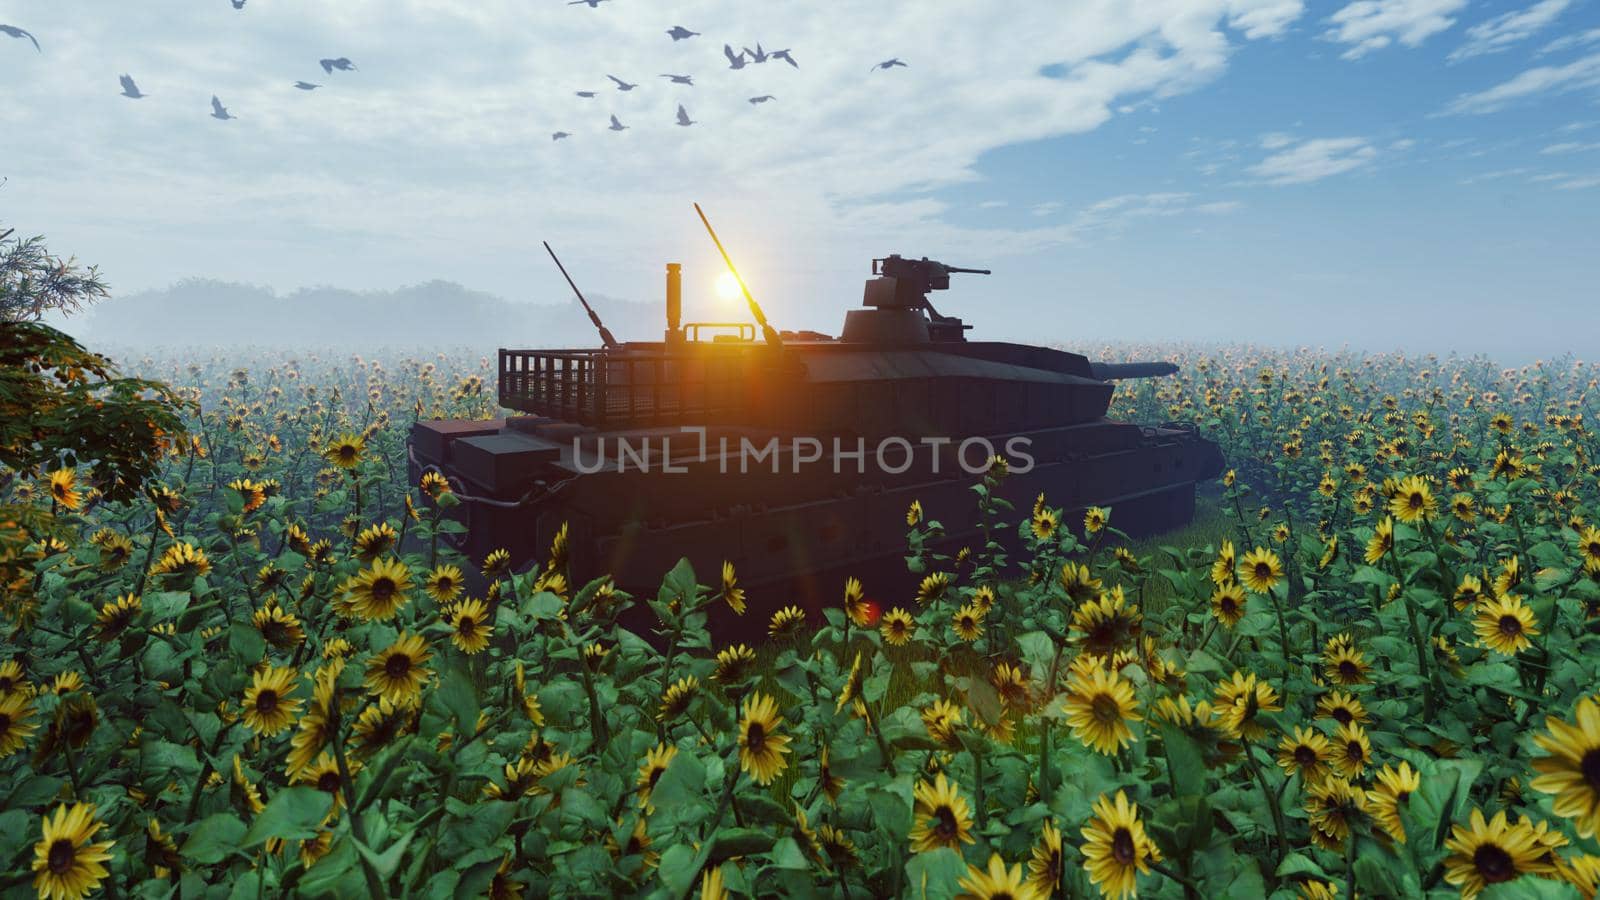 Military tank at sunset on a field in the middle of sunflowers.